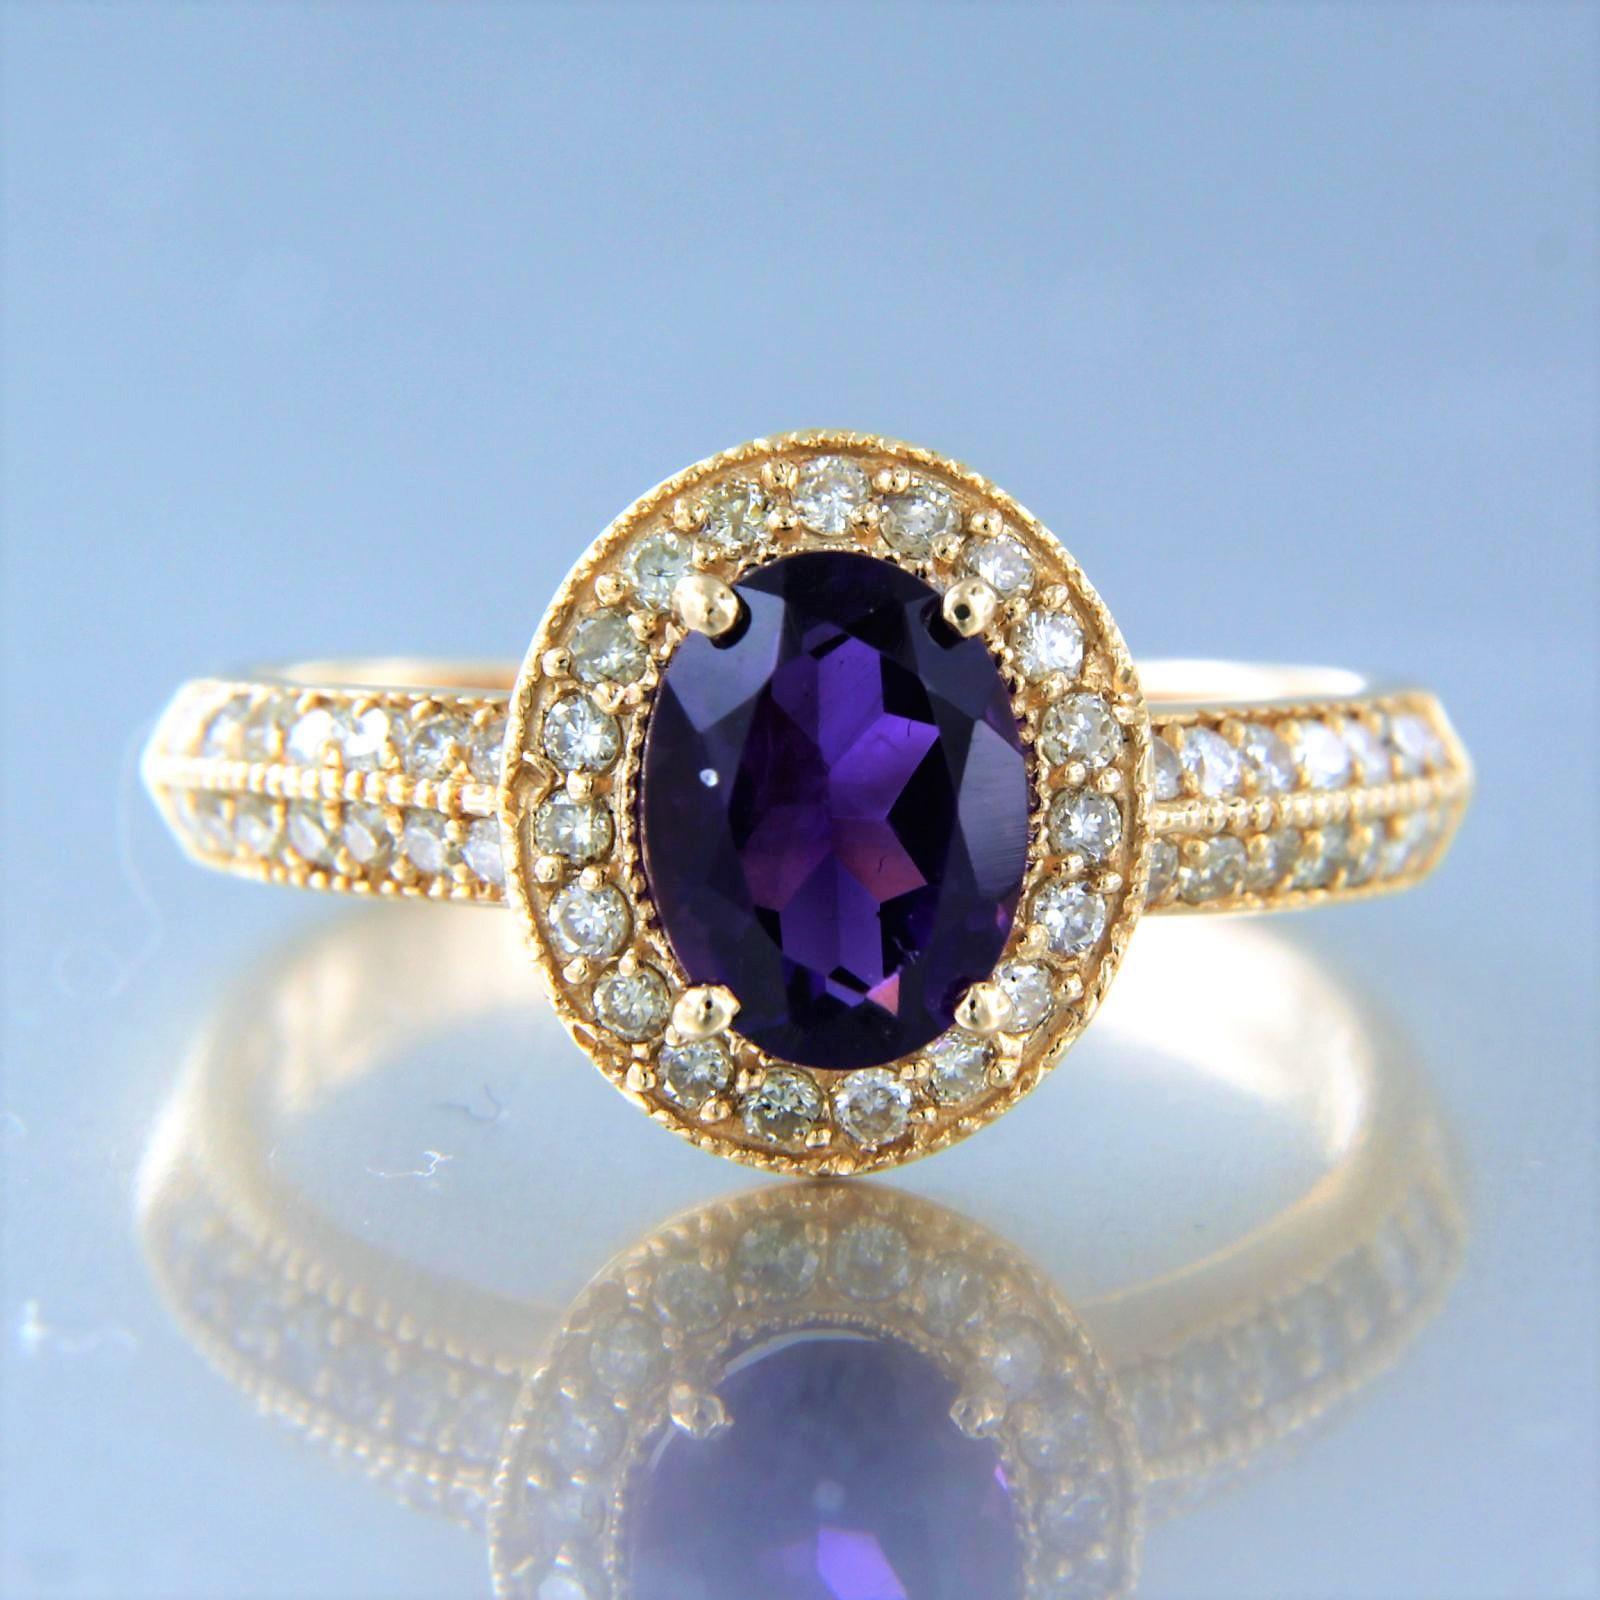 14k pink gold ring set with amethyst. 1.30ct and around it brilliant cut diamonds up to. 0.44ct – H/I – VS/SI – ring size U.S. 7.25 – EU. 17.25(54)

detailed description:

The top of the ring is in an oval shape measuring 1.1 cm by 1.0 cm wide and